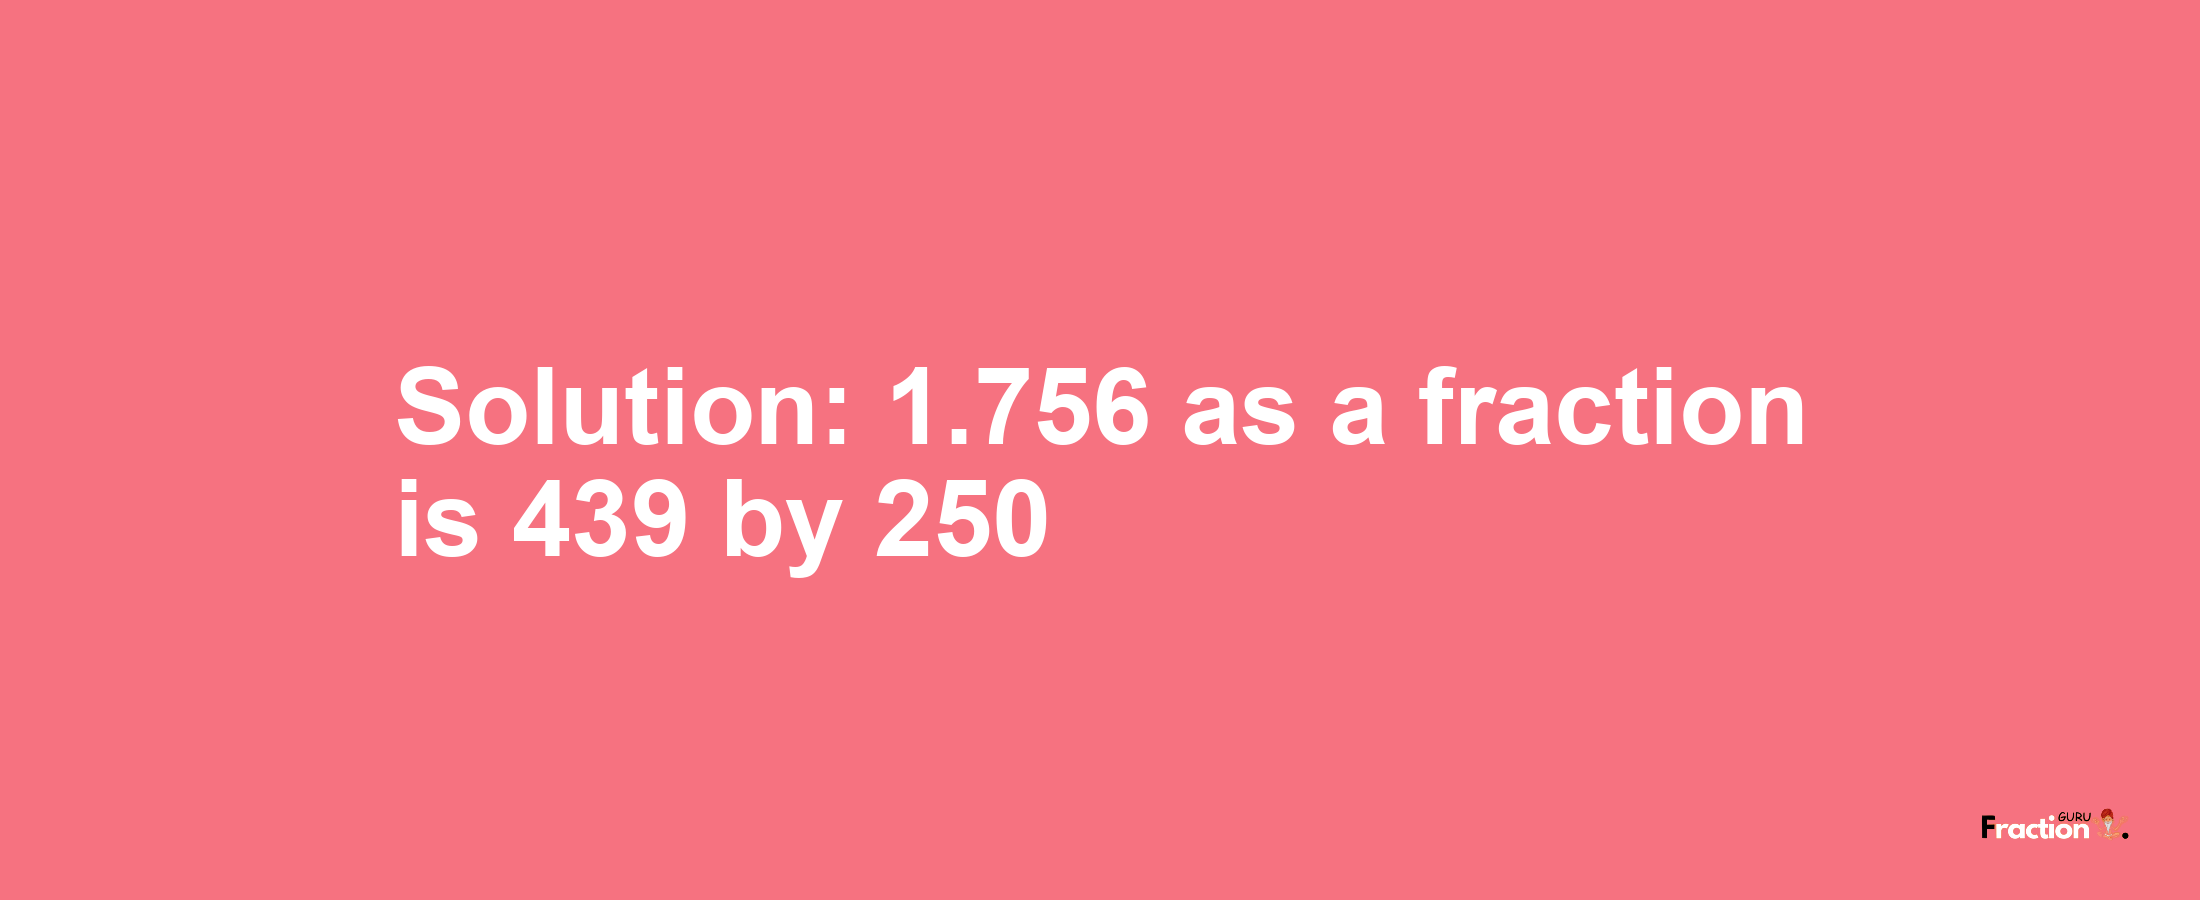 Solution:1.756 as a fraction is 439/250